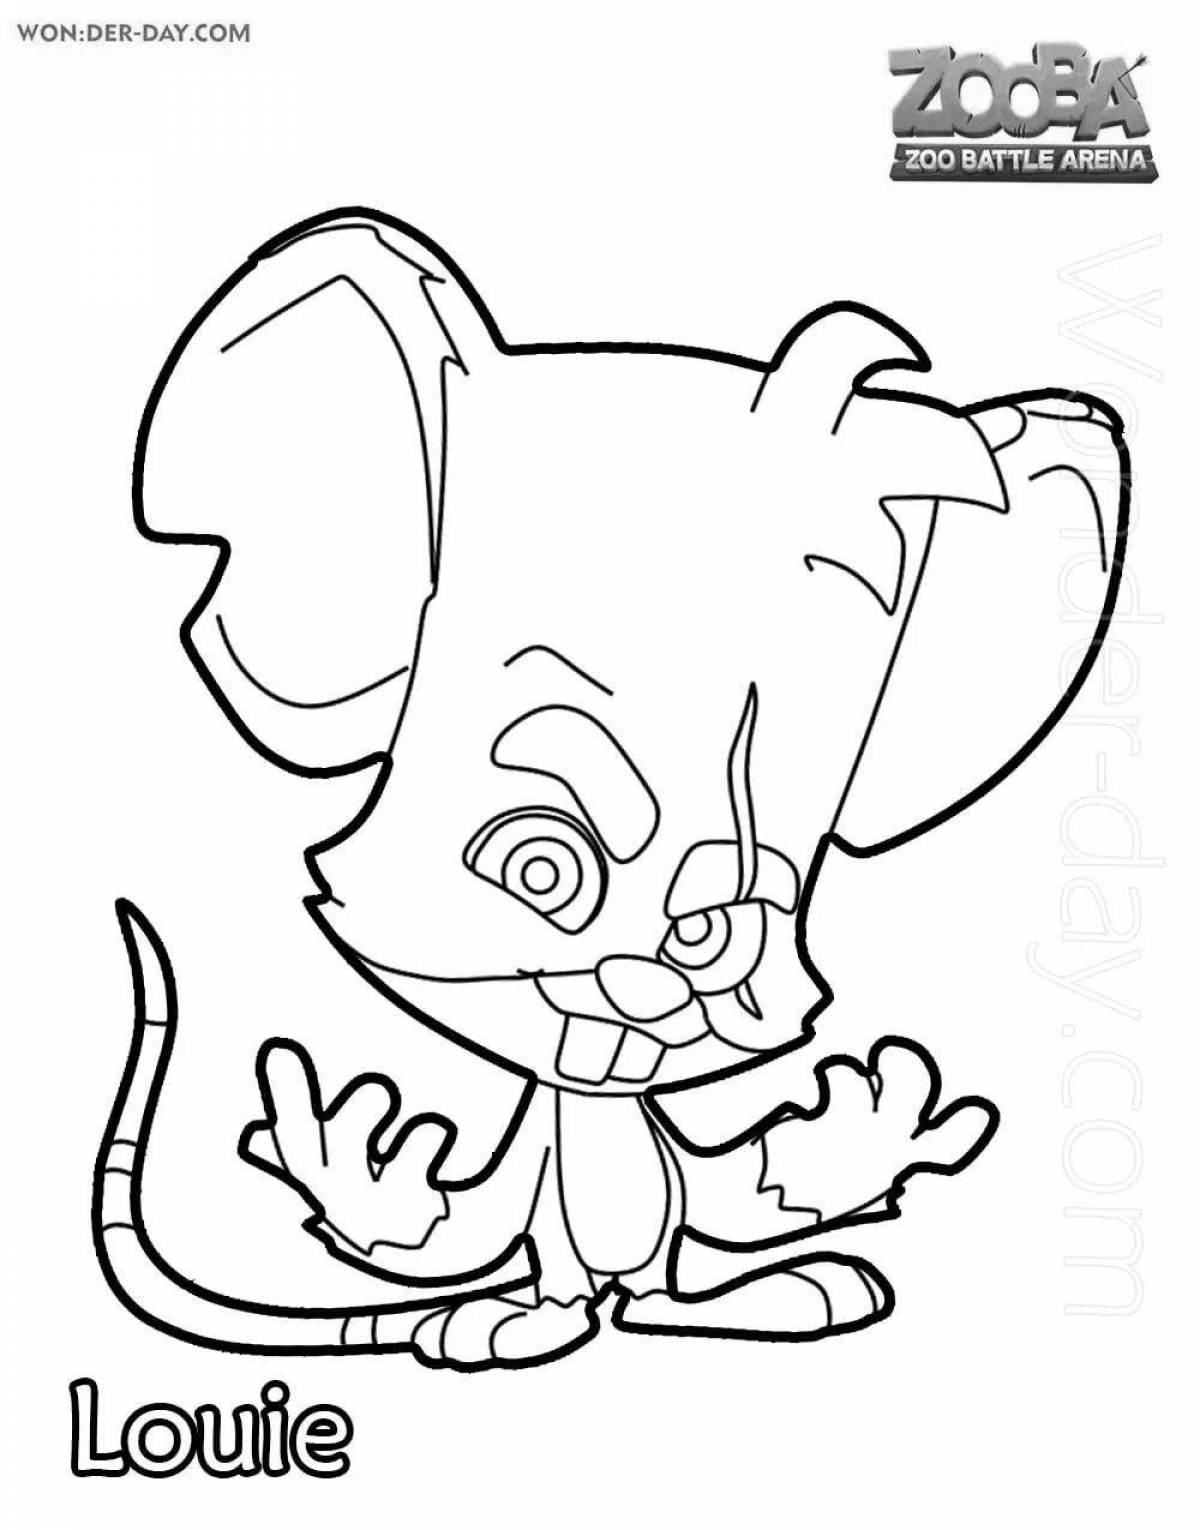 Colorful tooth fight animal coloring page